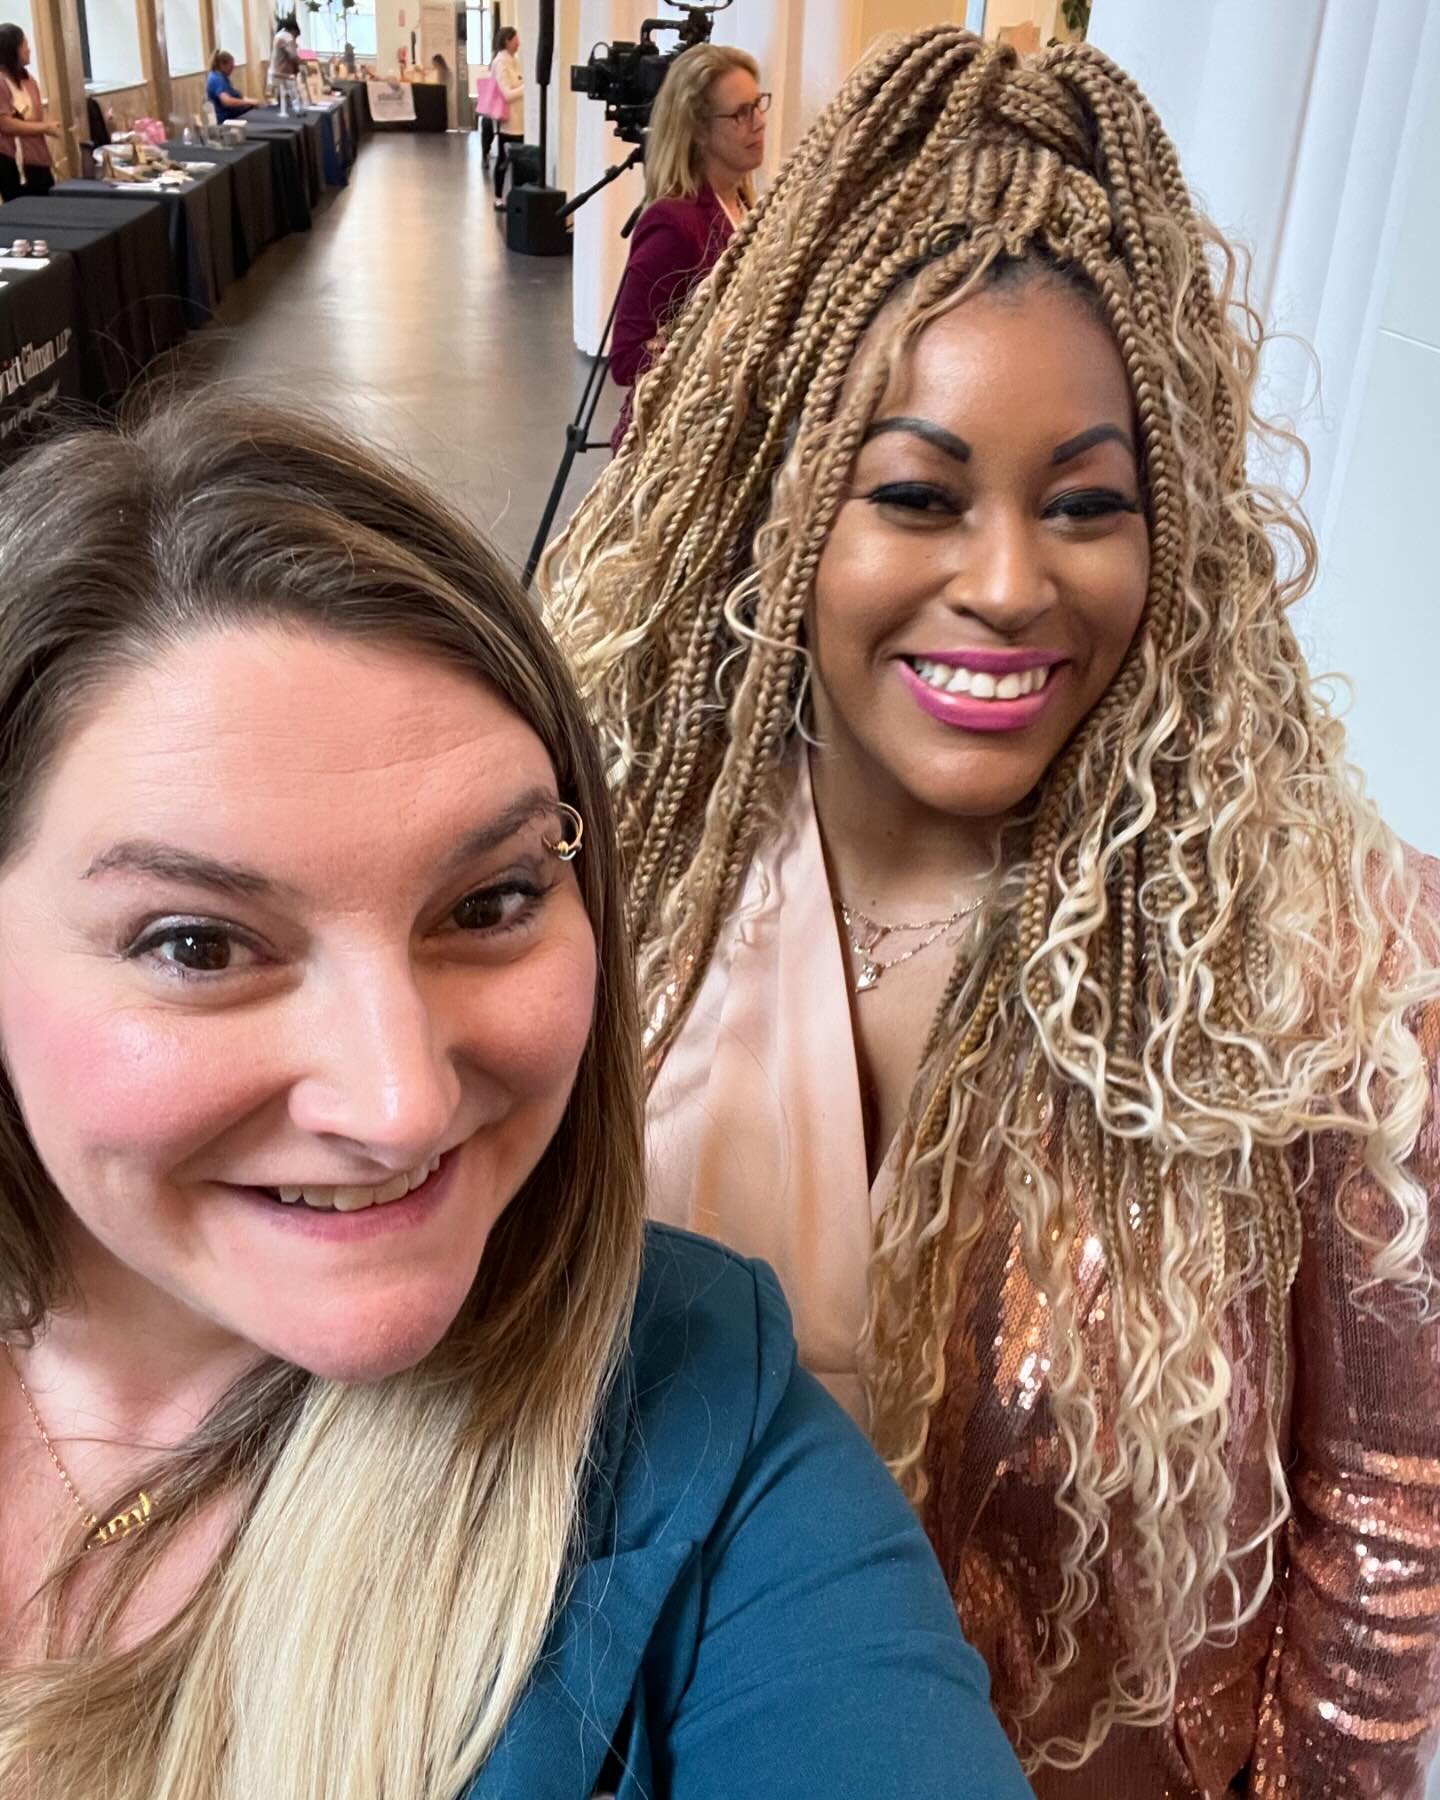 Such an empowering and inspiring time yesterday at the @wearestellaco @elevatewomenssummit in #rochesterny with @ebhowardconsultingllc !

Got to meet so many amazing women like @latiavaughan @rocevents @stacykfloral @andreahollandcoaching @flossie_ha